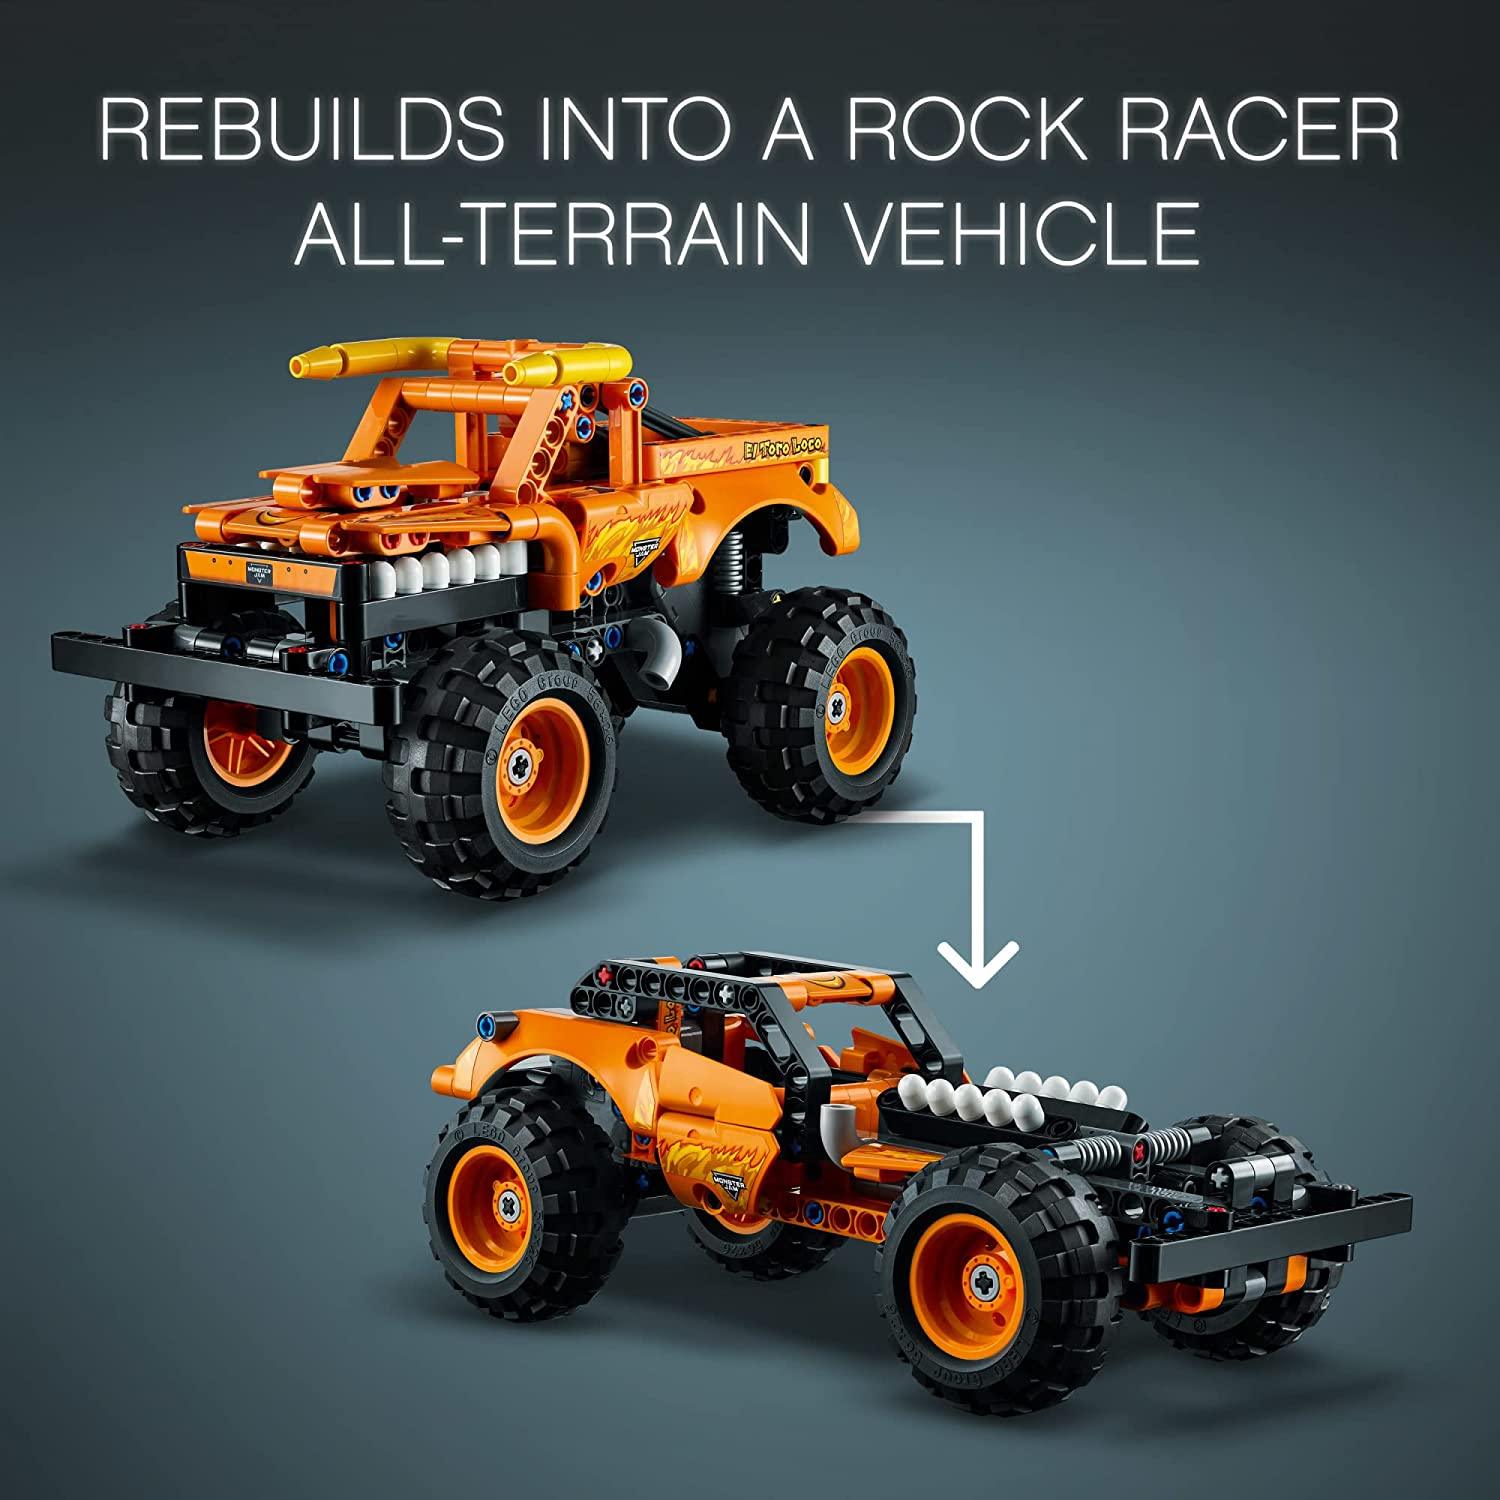 LEGO Technic Monster Jam El Toro Loco 42135 Model Building Kit; A 2-in-1 Pull-Back Toy for Kids Who Love Monster Trucks (247 Pieces) - BumbleToys - 8+ Years, 8-13 Years, Boys, Cars, LEGO, Monster Jam, OXE, Pre-Order, Technic